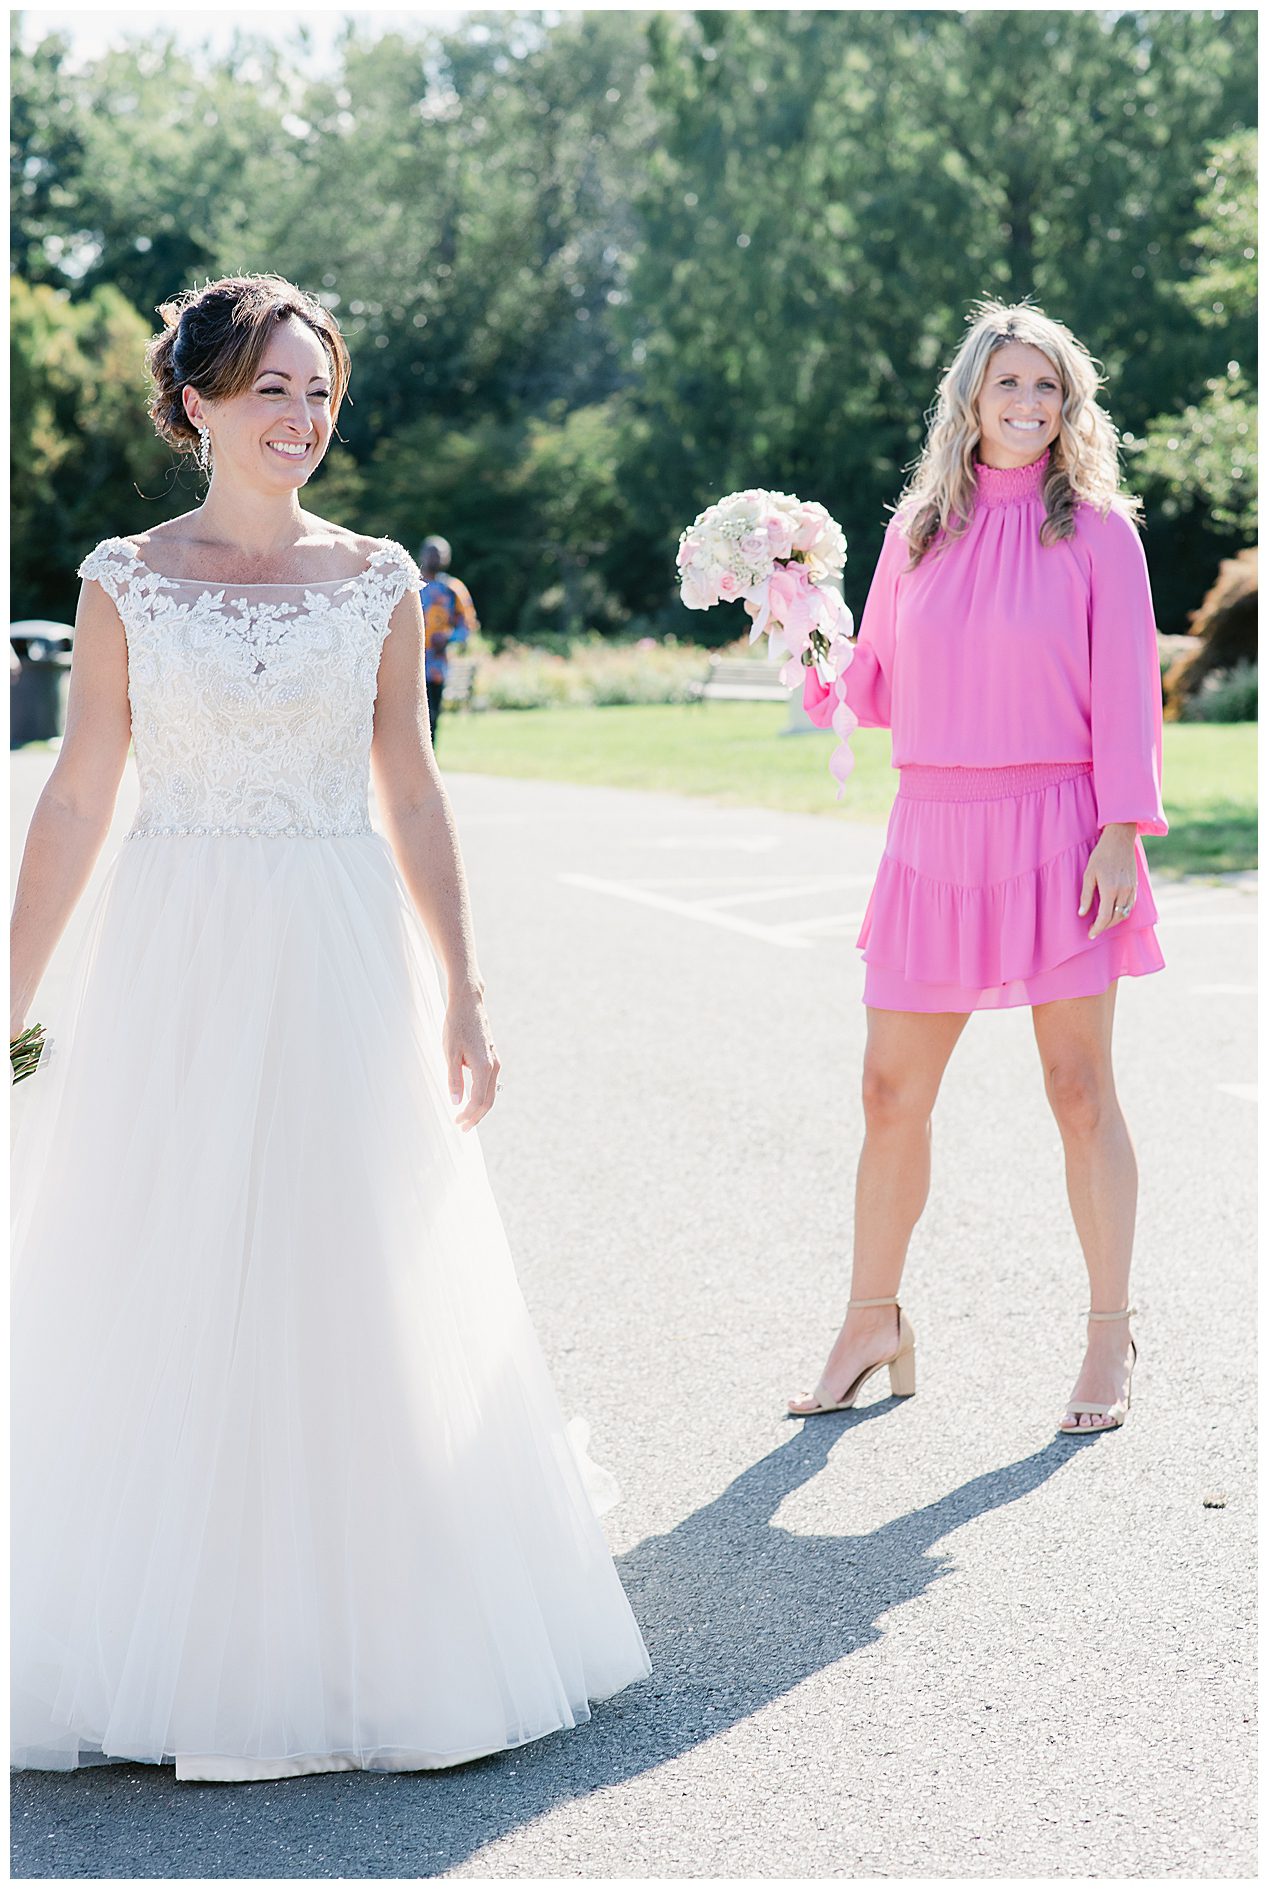 Bride and Maid of Honor. Micro wedding_ Kate Uhry photo